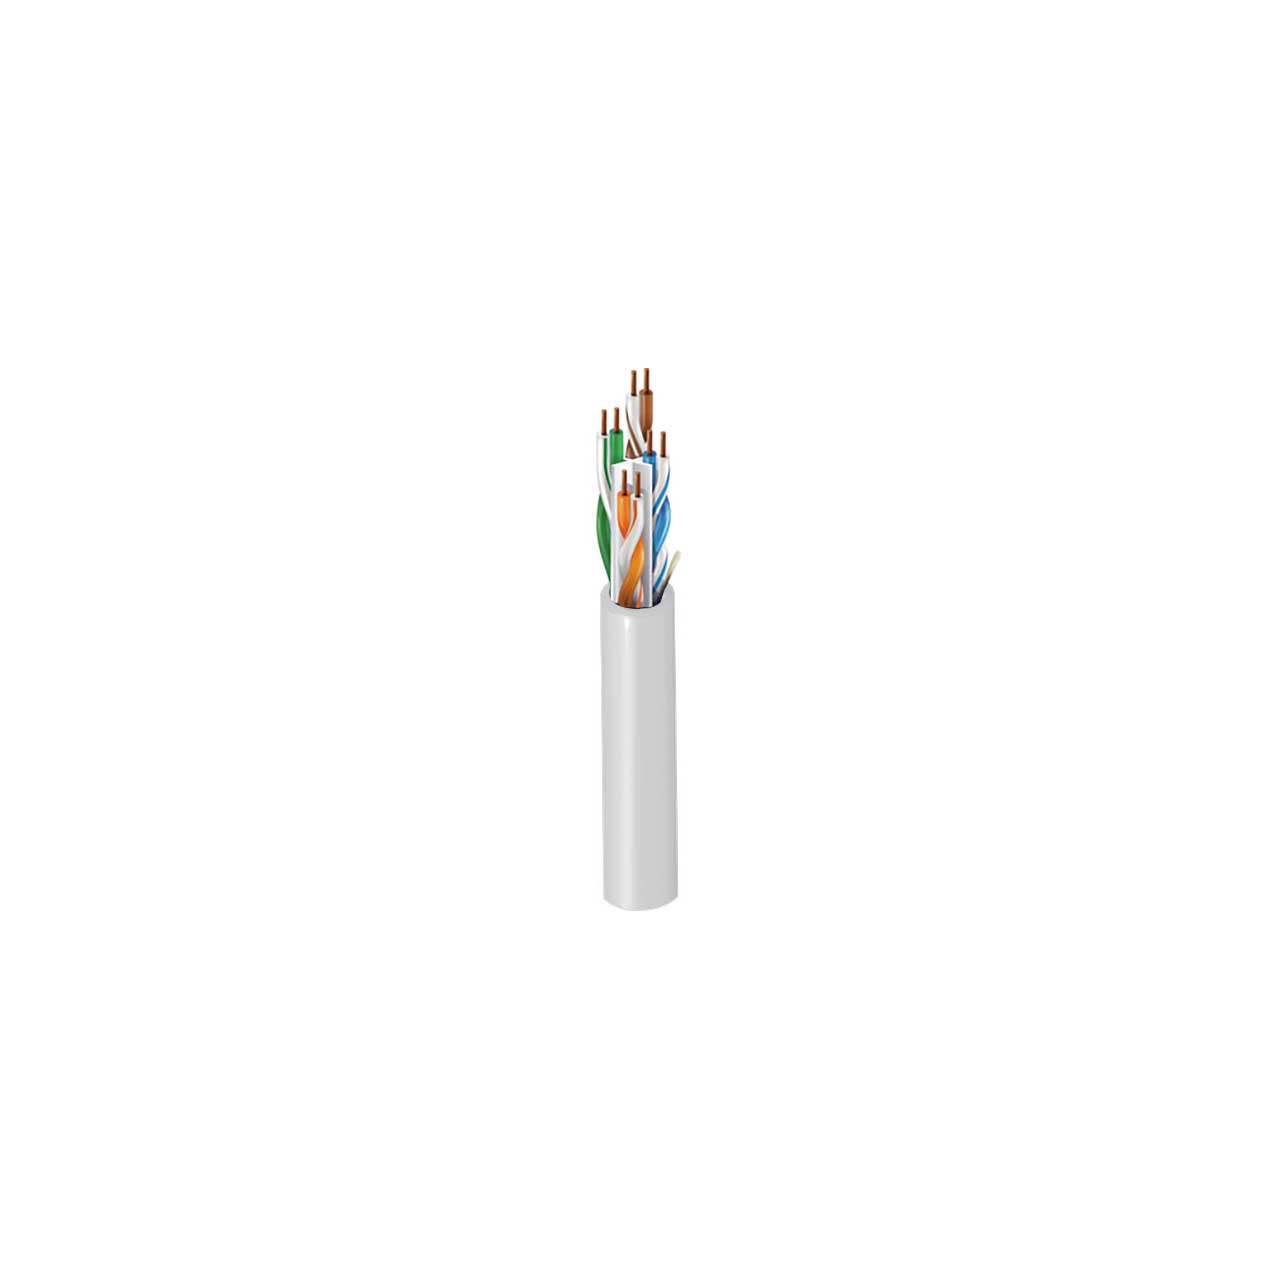 Belden 3632 Multi-Conductor - Enhanced Category - 6 Bonded-Pair - Voice and Data Cable - White - Per Foot BL-3632-FT-WE